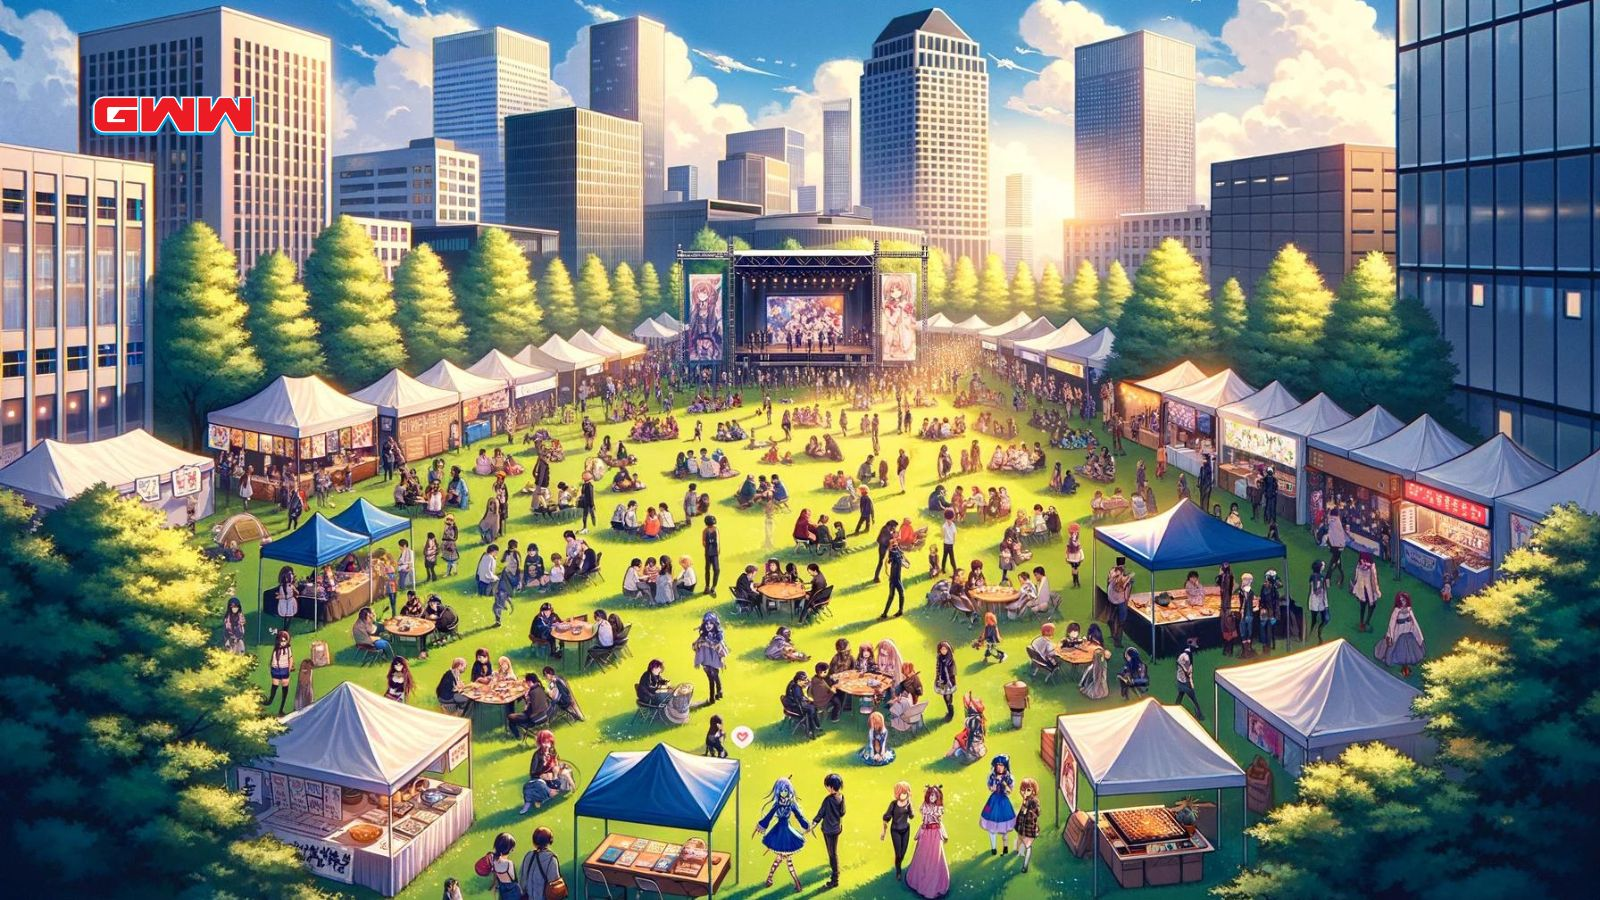 Urban anime event with stage and city backdrop